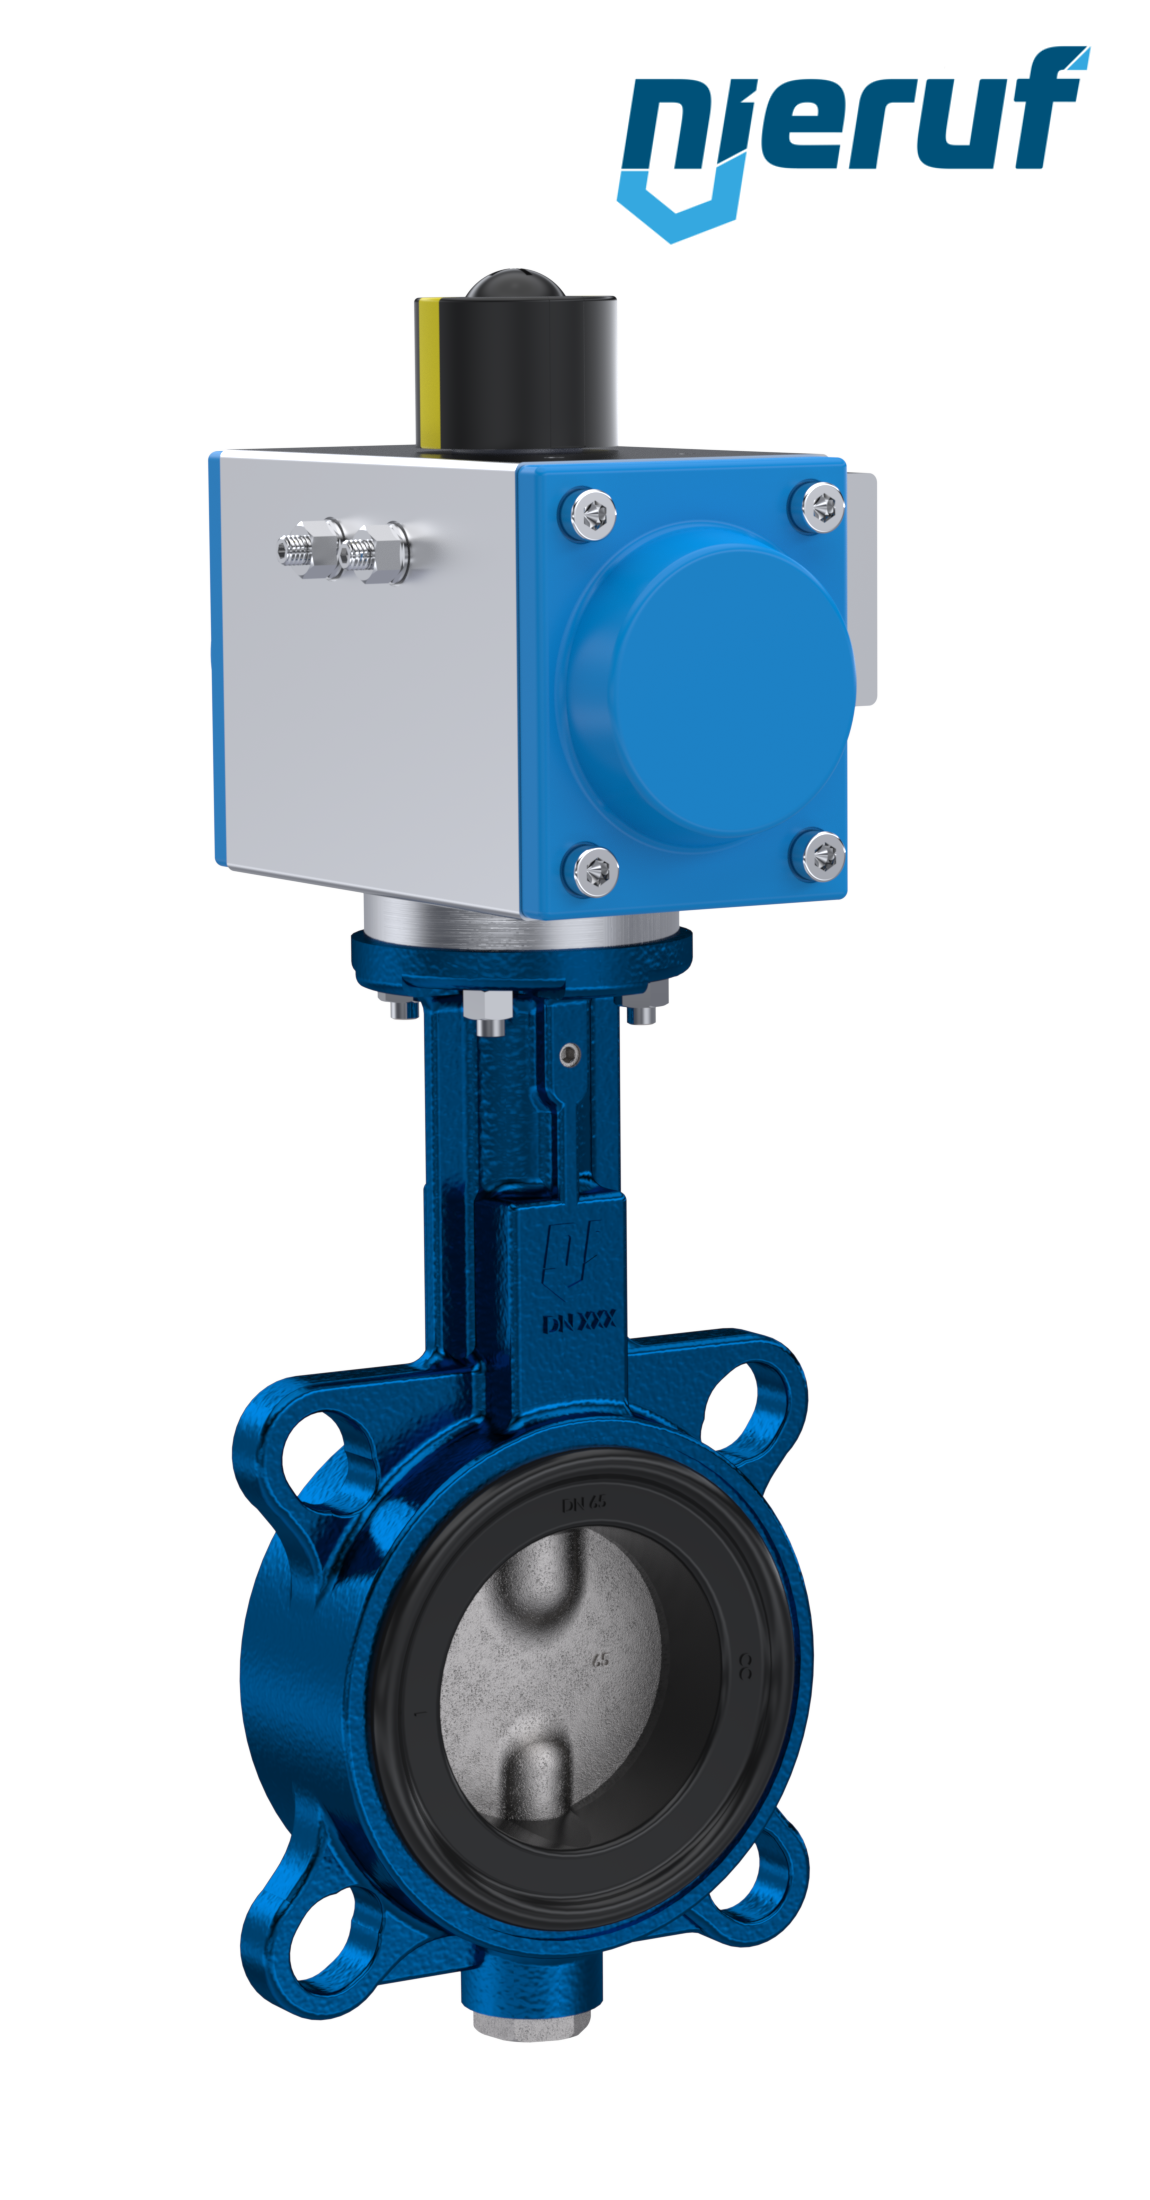 Butterfly valve DN 50 AK01 EPDM DVGW drinking water, WRAS, ACS, W270 pneumatic actuator double acting